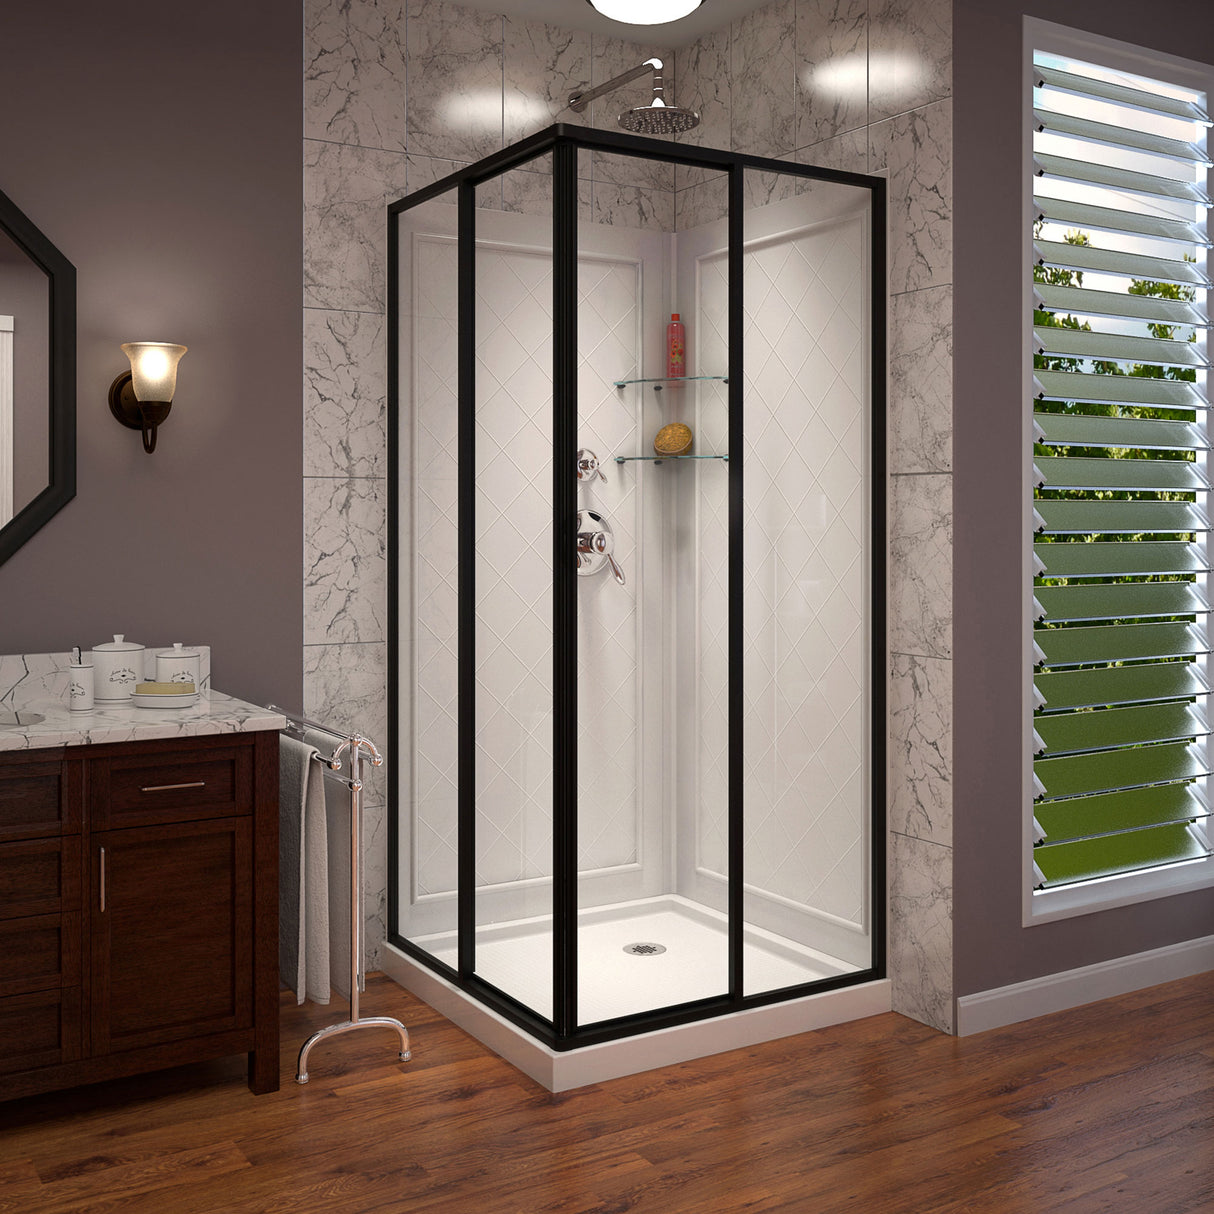 DreamLine Cornerview 36 in. D x 36 in. W Framed Sliding Shower Enclosure, Shower Base and Acrylic Wall Kit in Satin Black